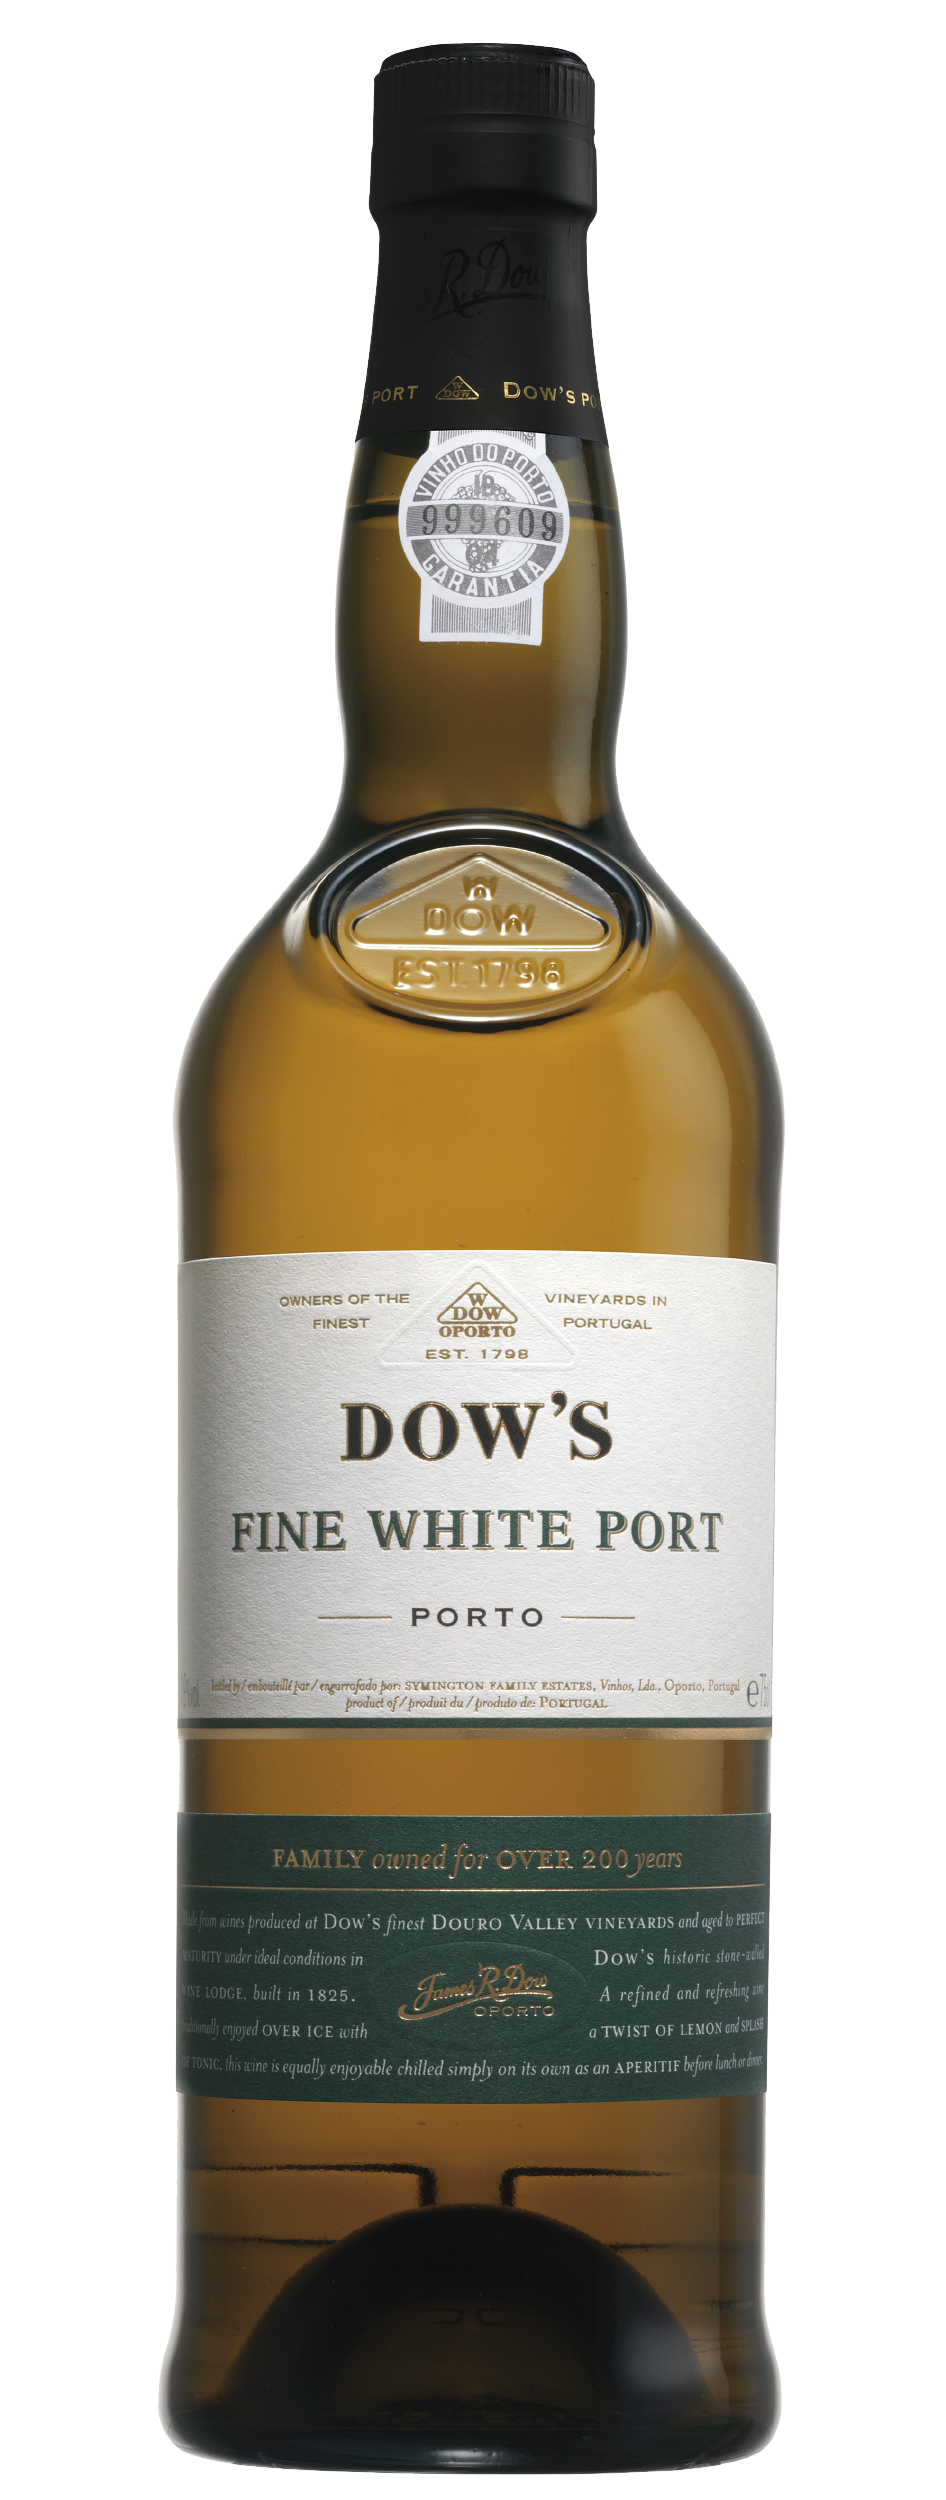 Product Image for DOW'S FINE WHITE PORT